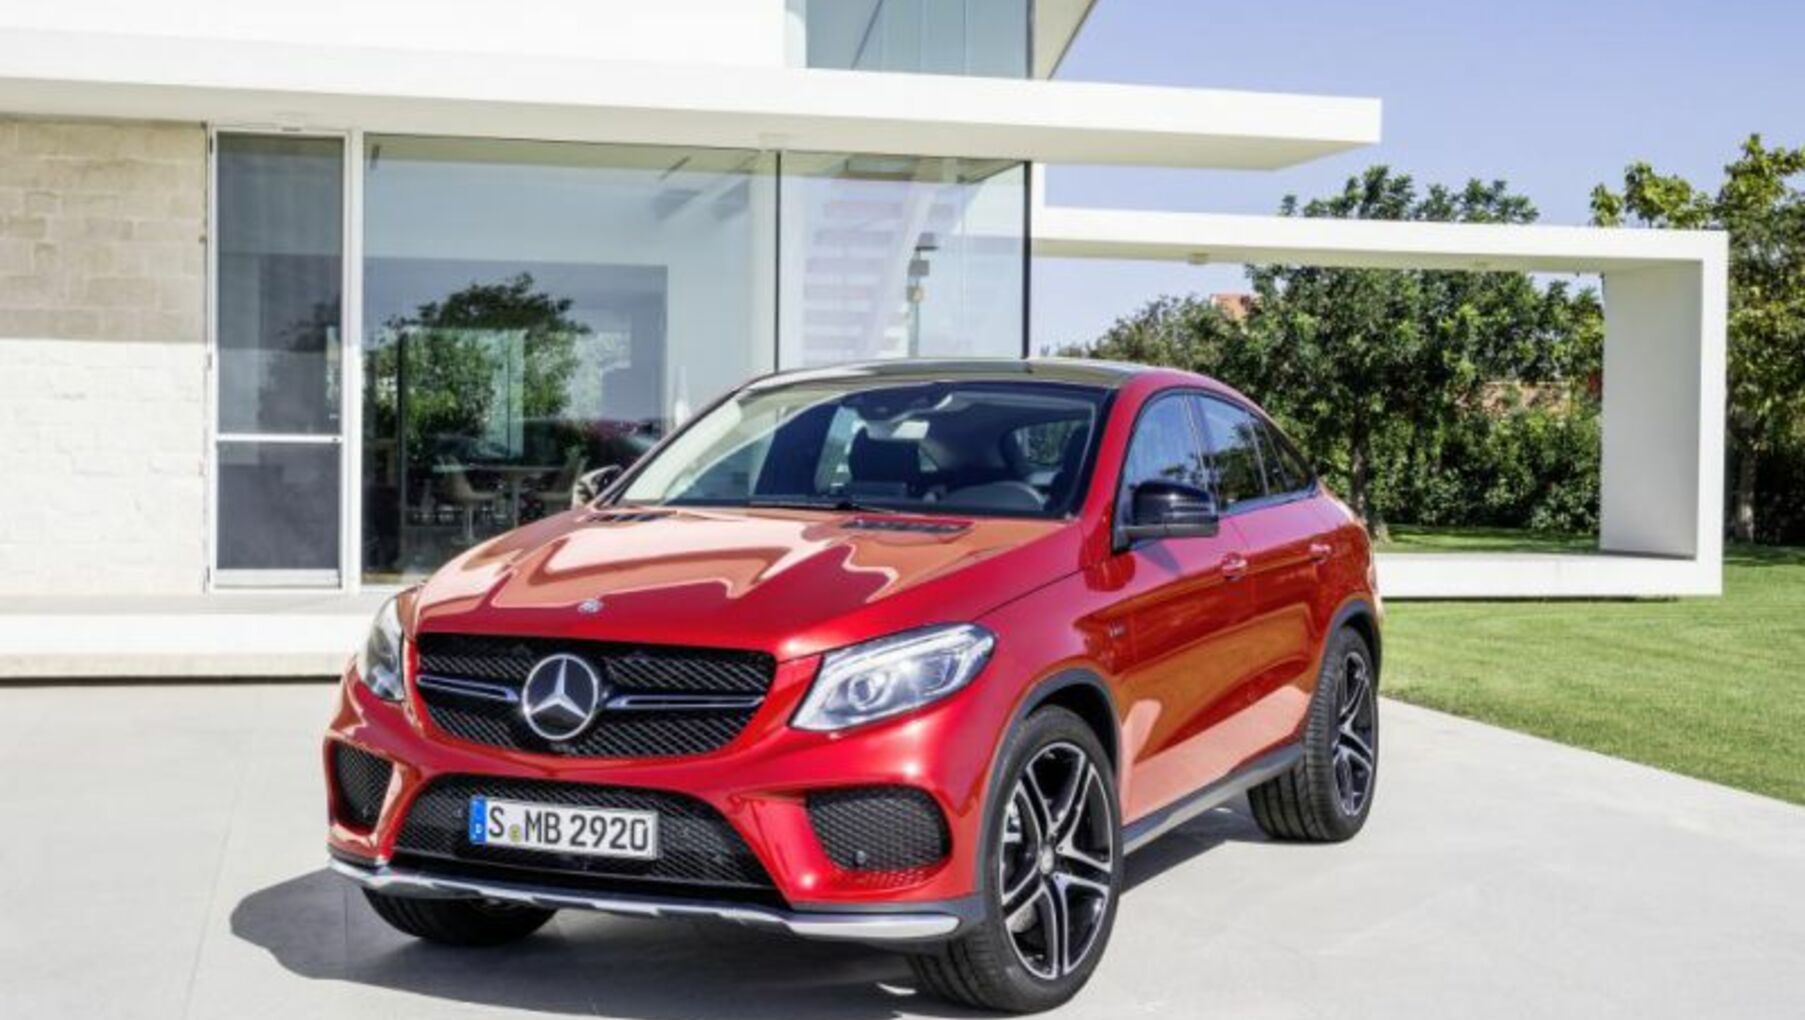 Mercedes-Benz GLE Coupe (C292) AMG GLE 63 (558 Hp) 4MATIC G-TRONIC 2015, 2016, 2017, 2018, 2019, 2020, 2021 